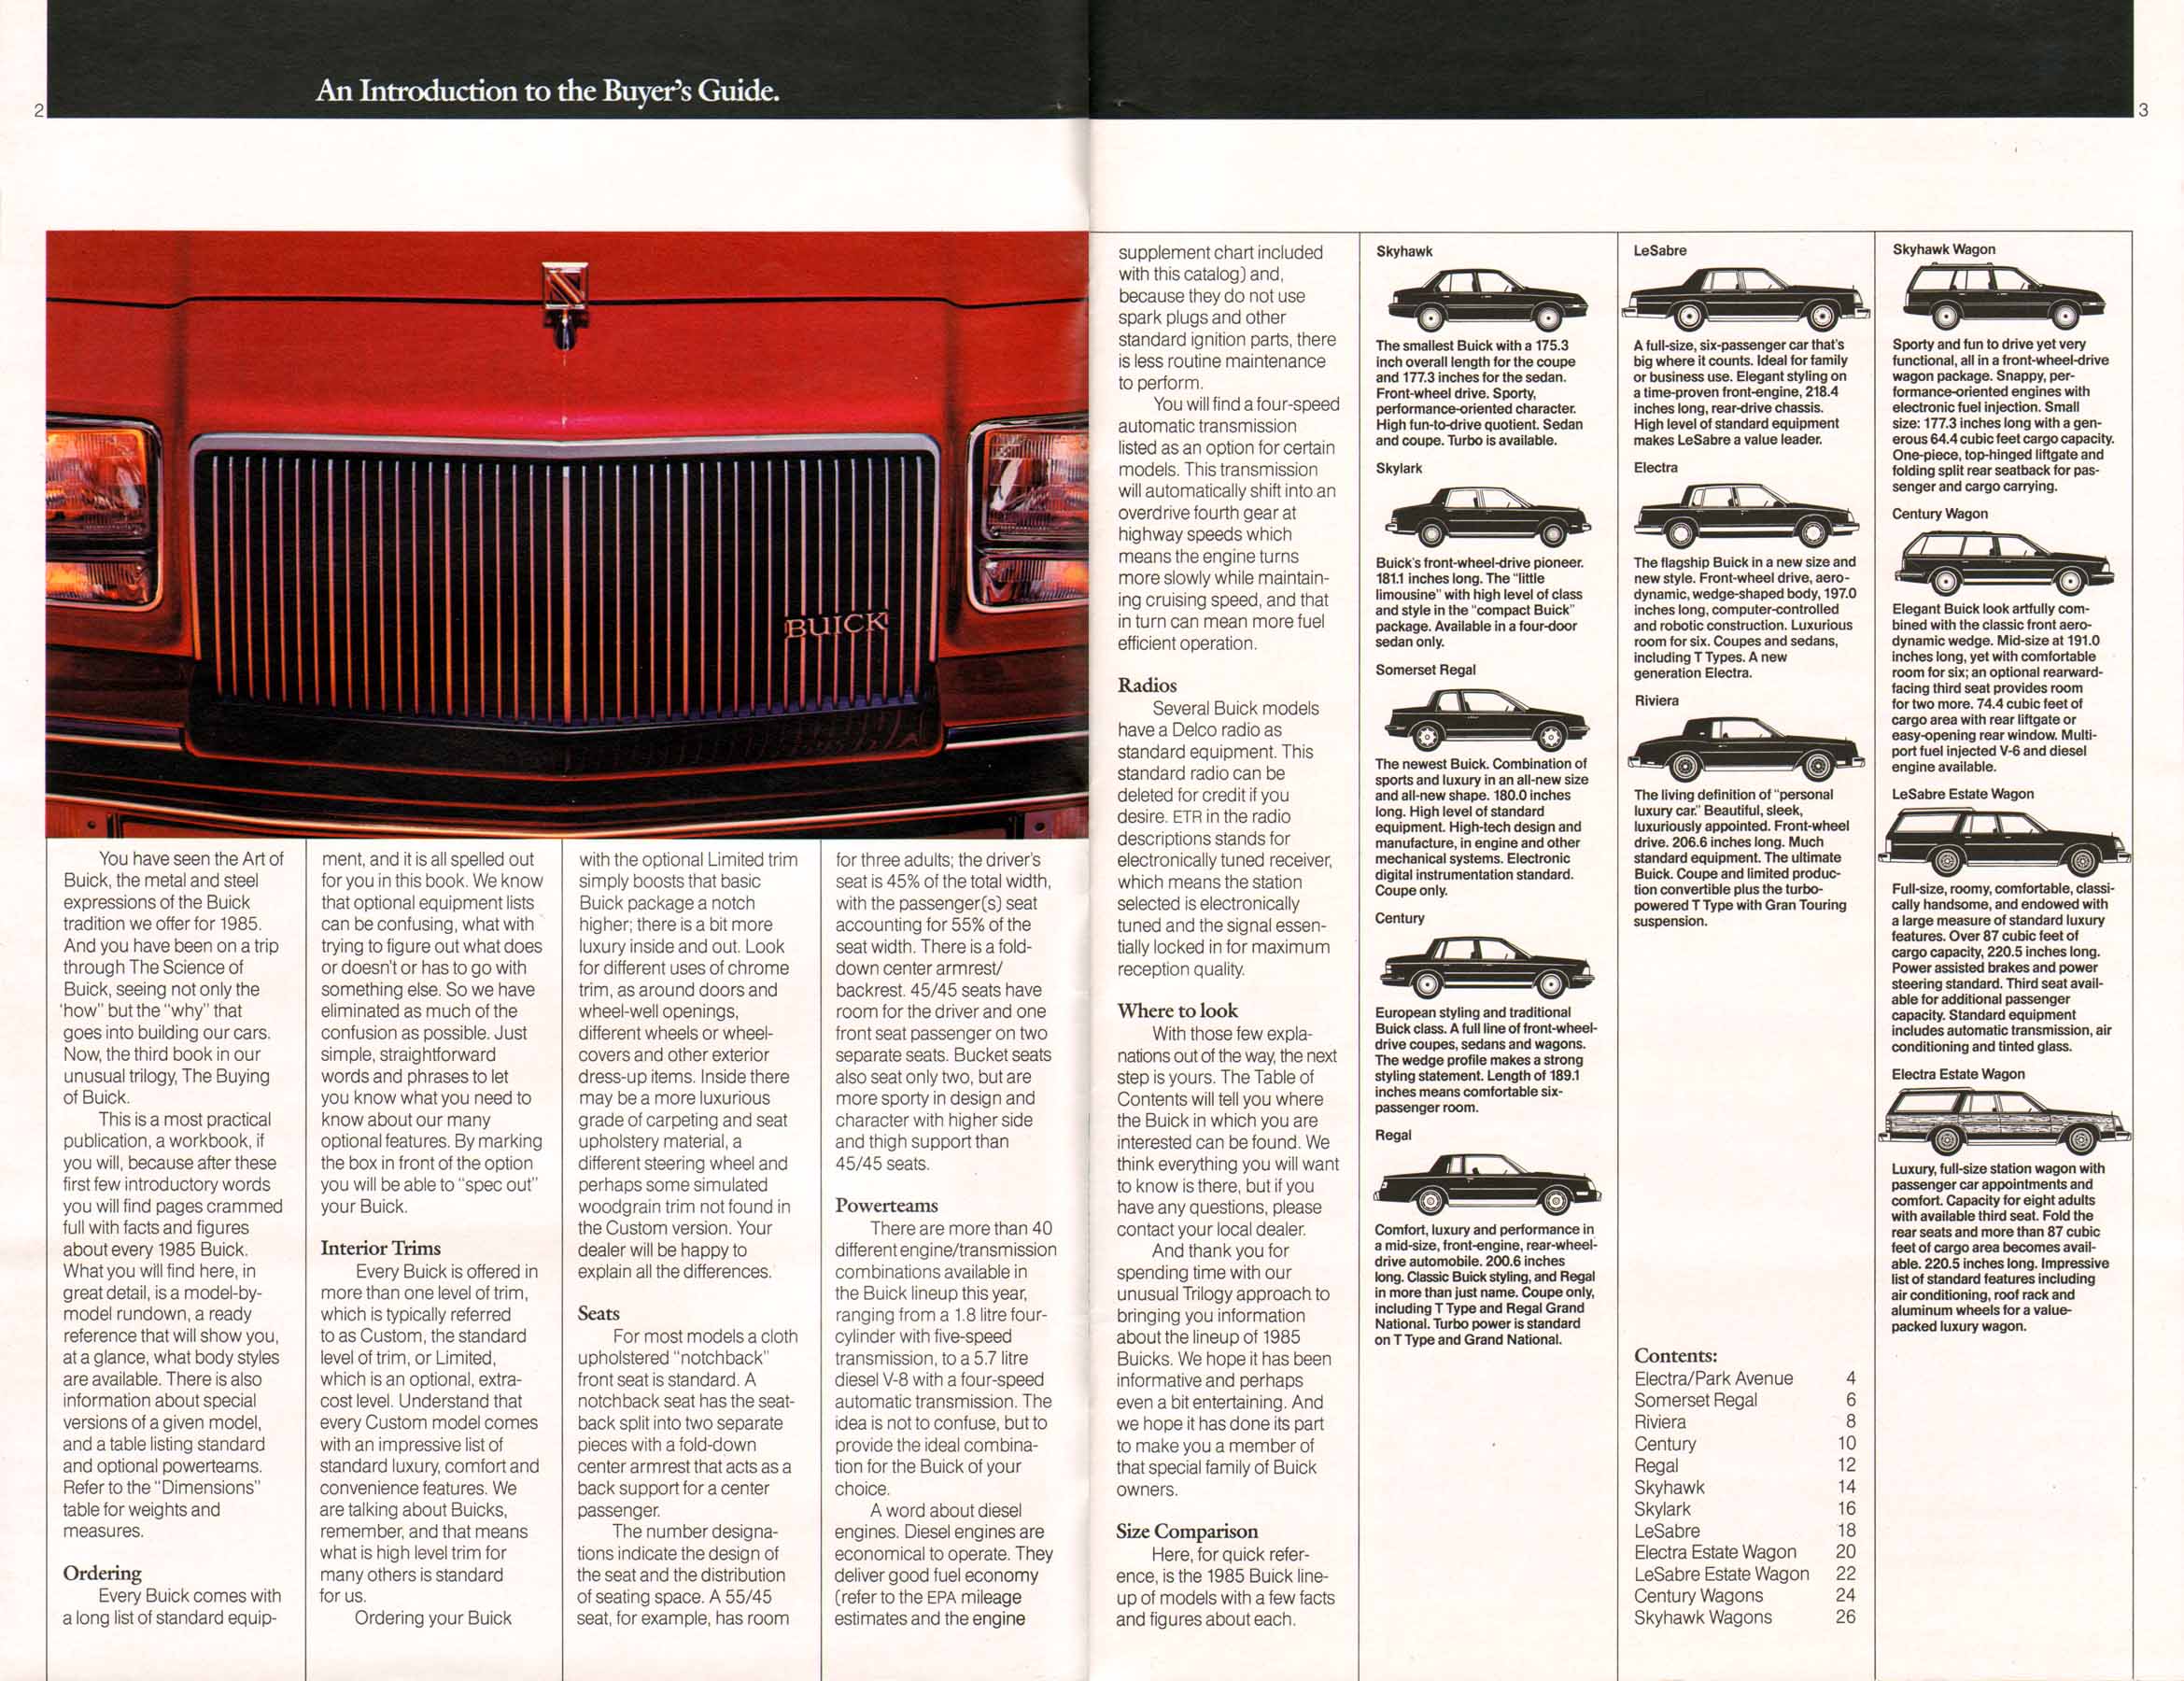 1985 The Buying of Buick-02-03